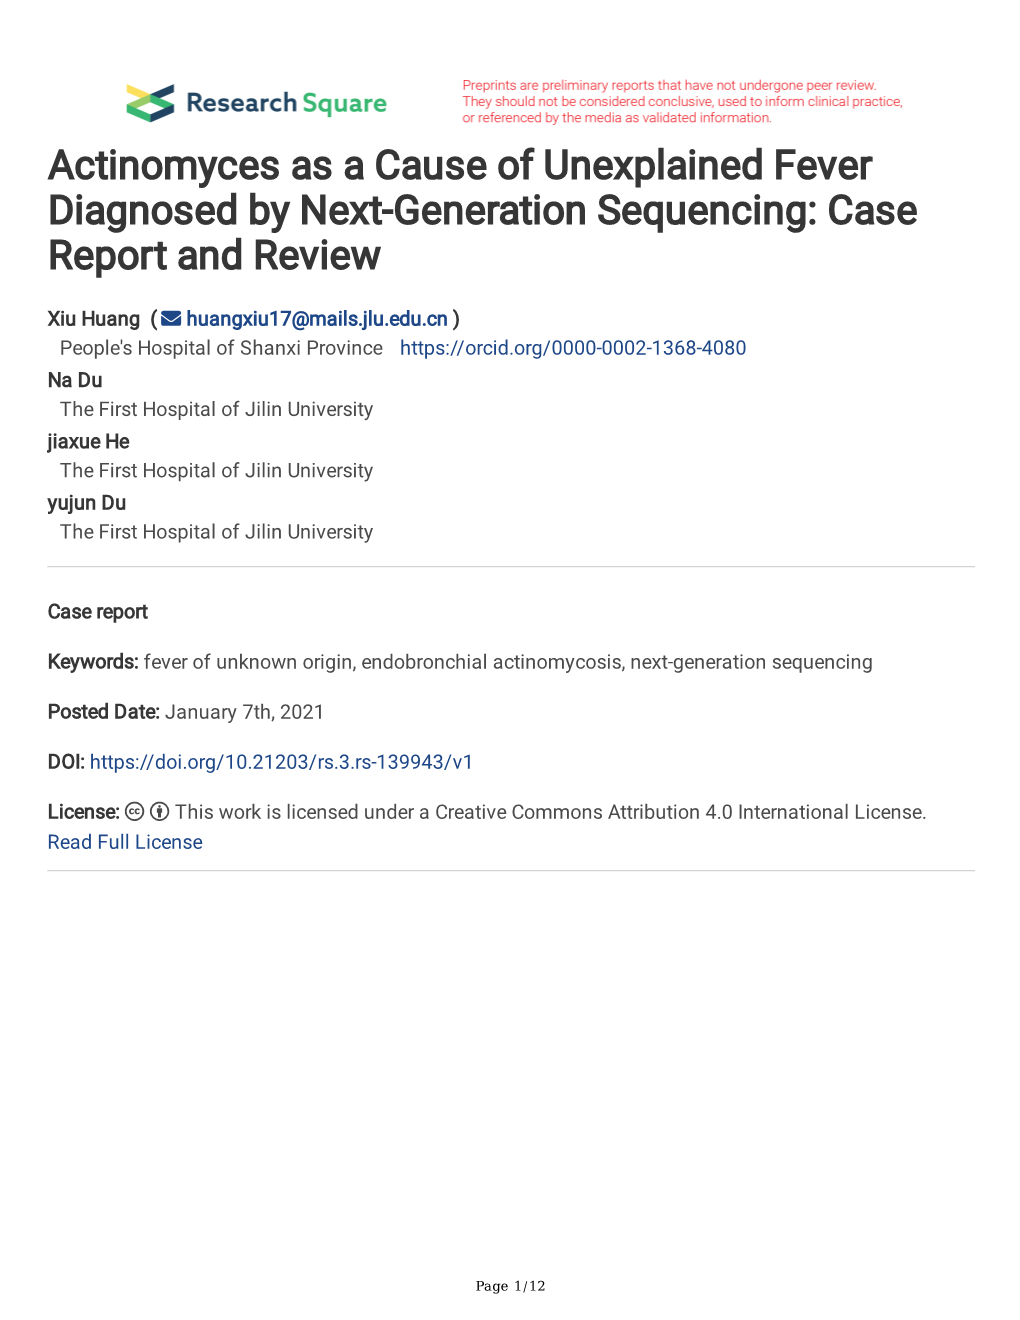 Actinomyces As a Cause of Unexplained Fever Diagnosed by Next-Generation Sequencing: Case Report and Review